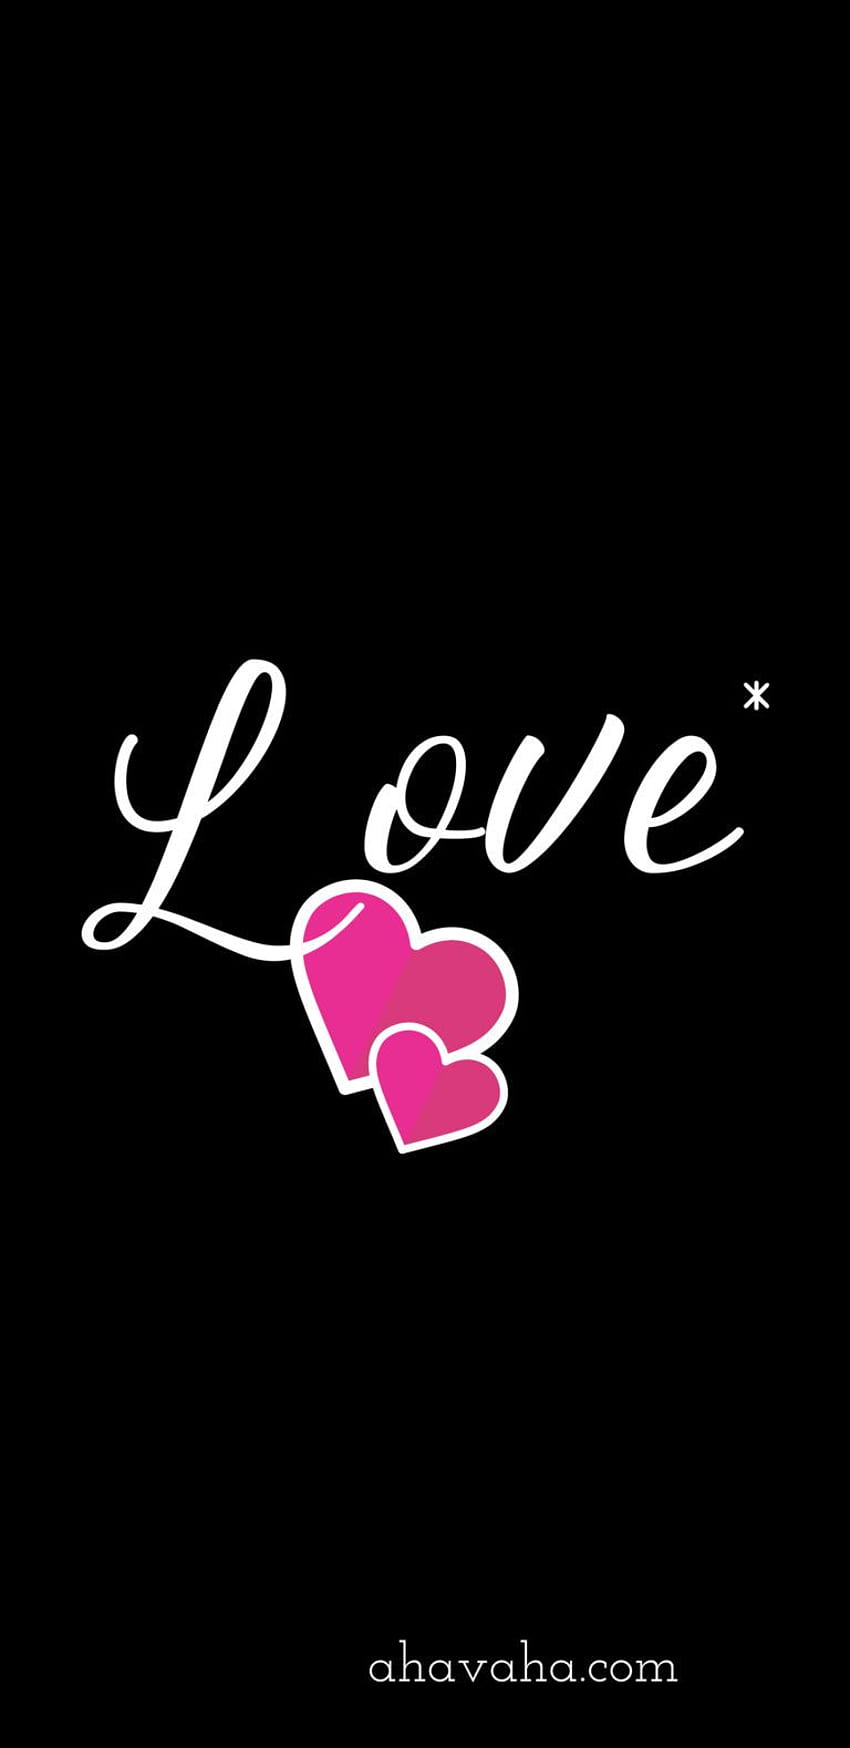 Love Hearts Star Pink White Themed Christian and Screensaver Mobile Phone Black Background 3. christian , Christian , christian HD phone wallpaper